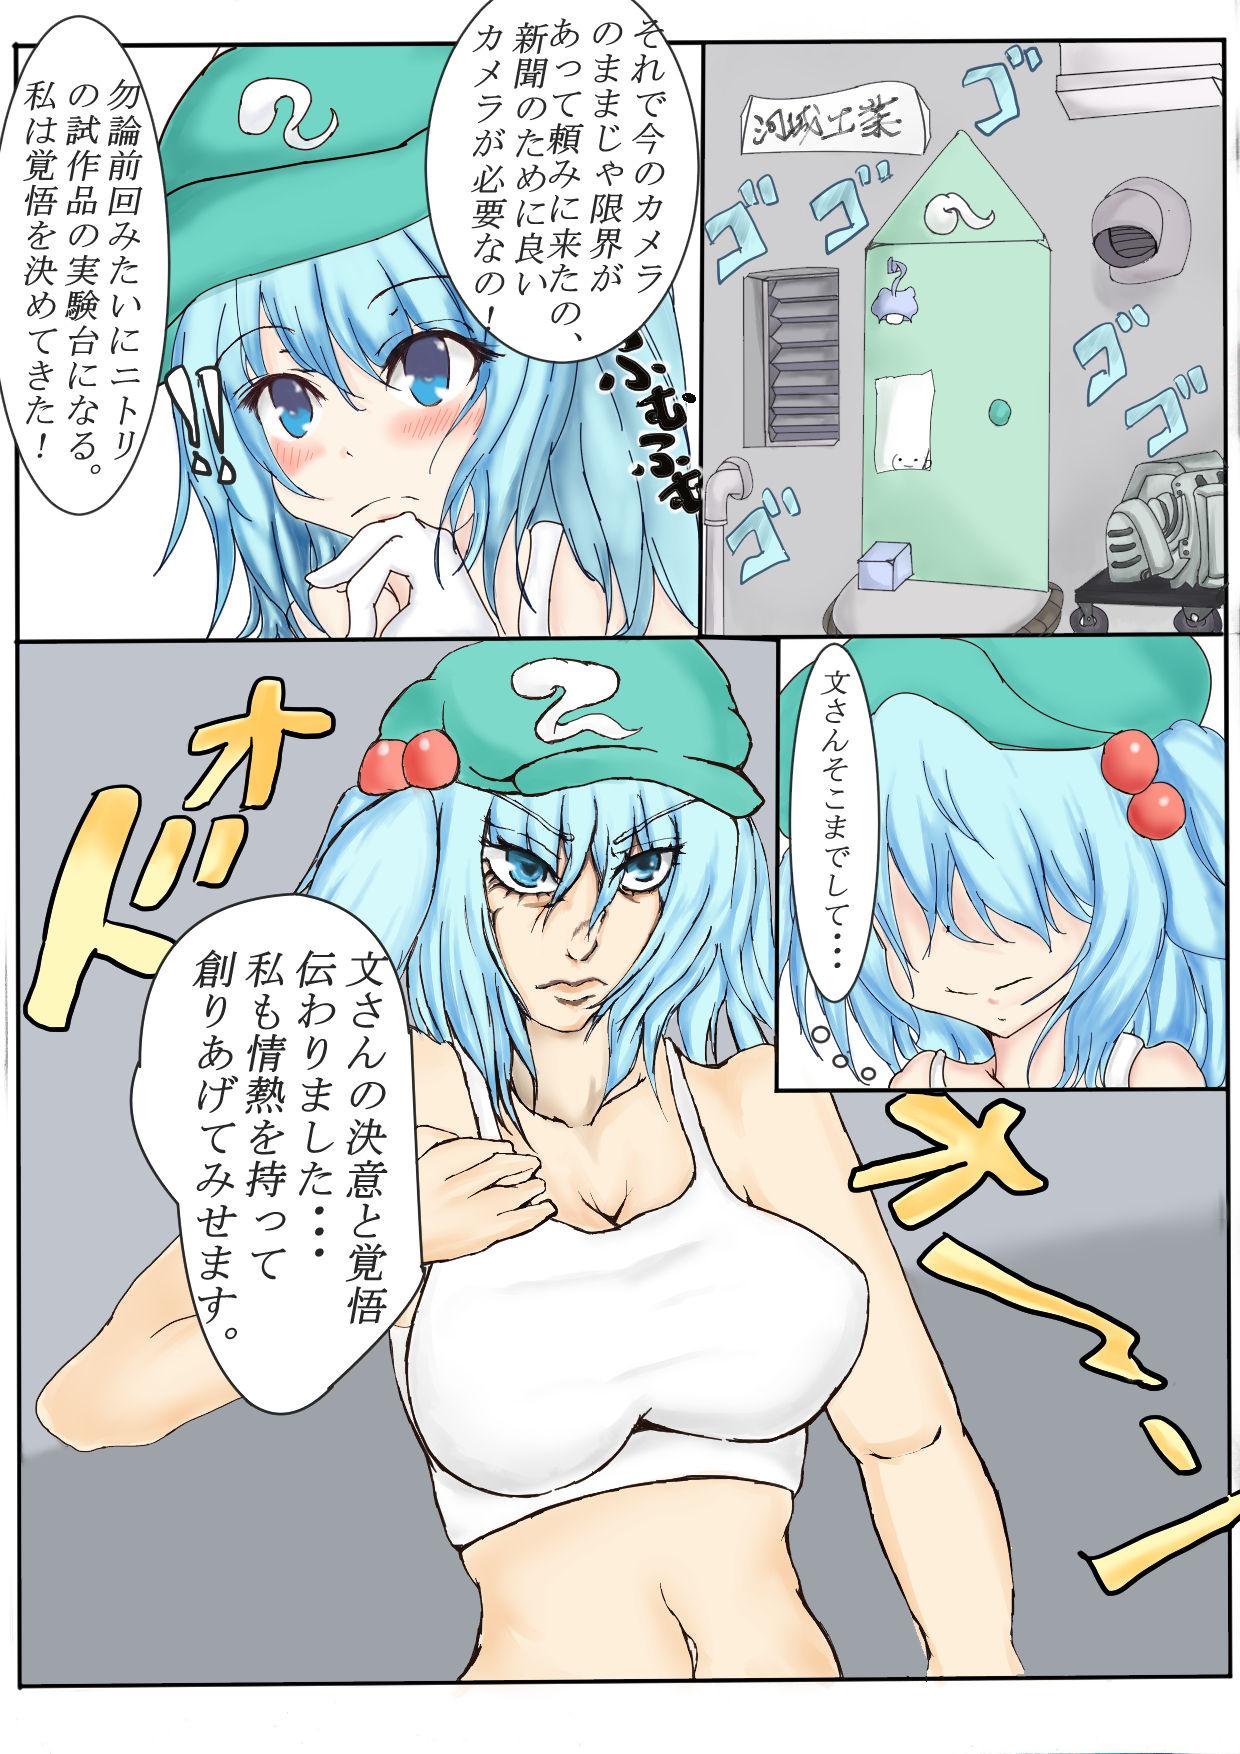 Amature Porn 射命丸文とかっぱのくすぐり互恵録 - Touhou project Gaypawn - Page 3